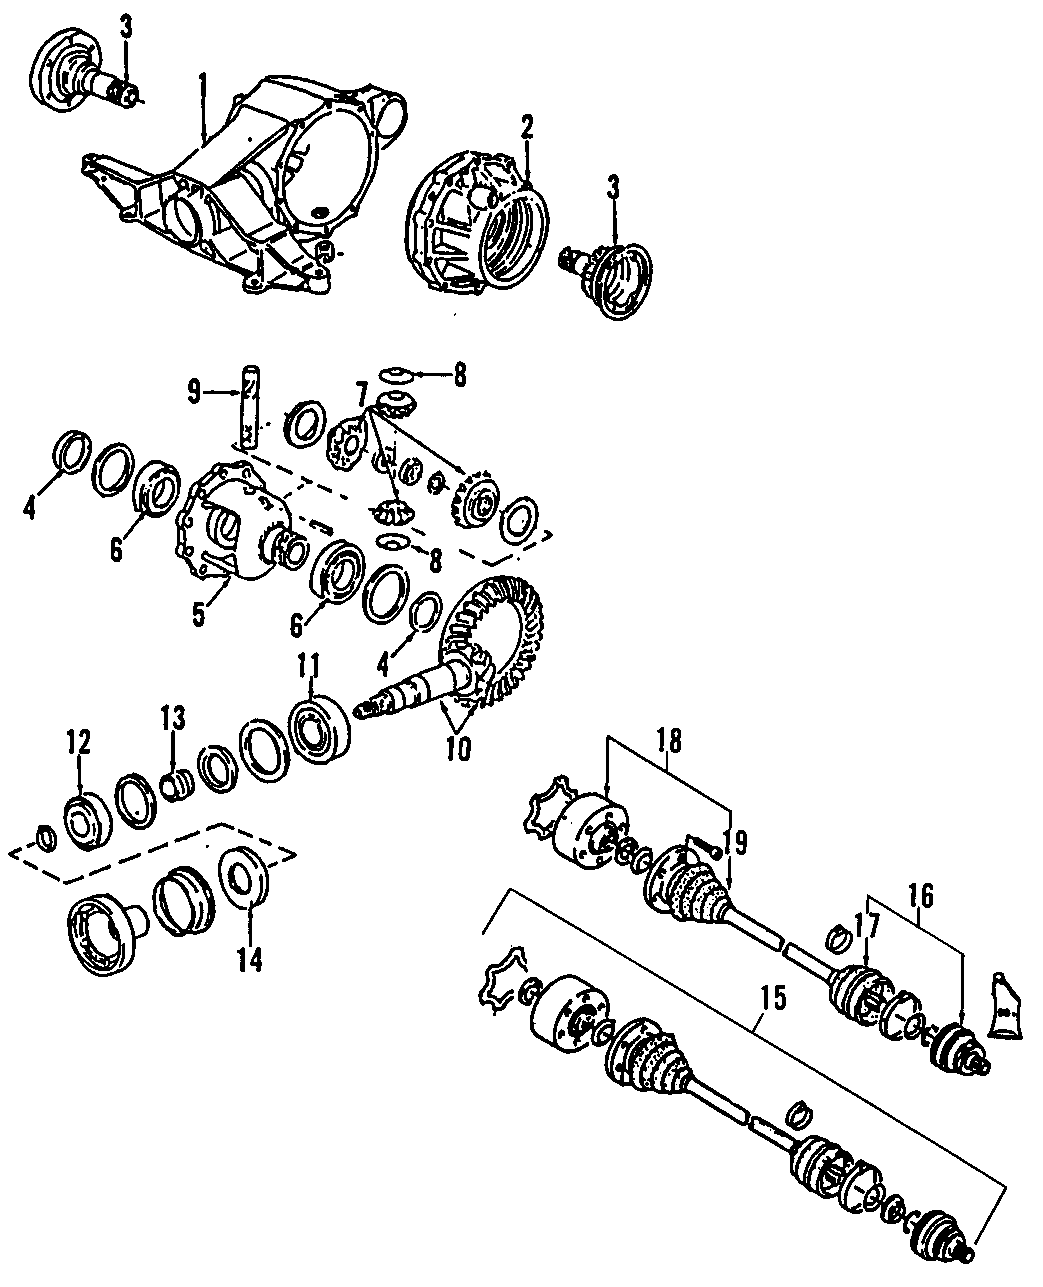 DRIVE AXLES. REAR AXLE. AXLE SHAFTS & JOINTS. DIFFERENTIAL. PROPELLER SHAFT.https://images.simplepart.com/images/parts/motor/fullsize/E255240.png